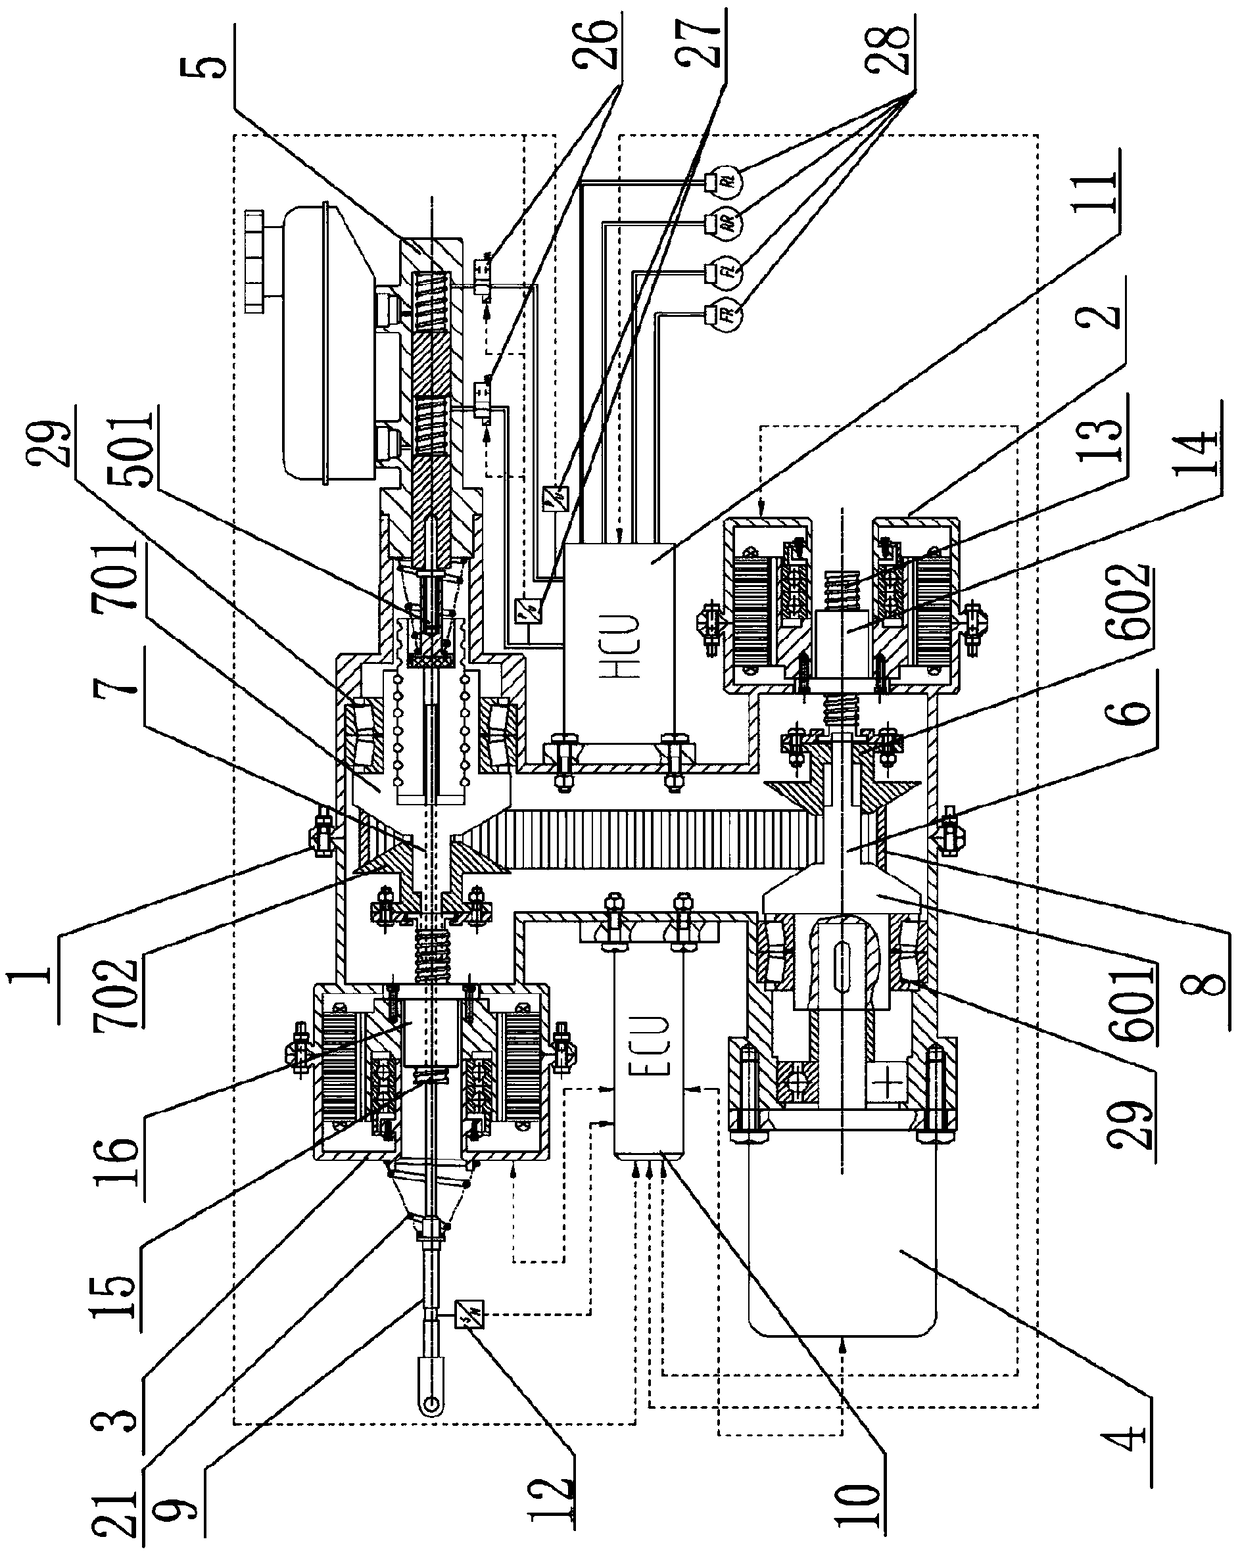 Integrated electronic hydraulic braking system capable of actively switching driving styles